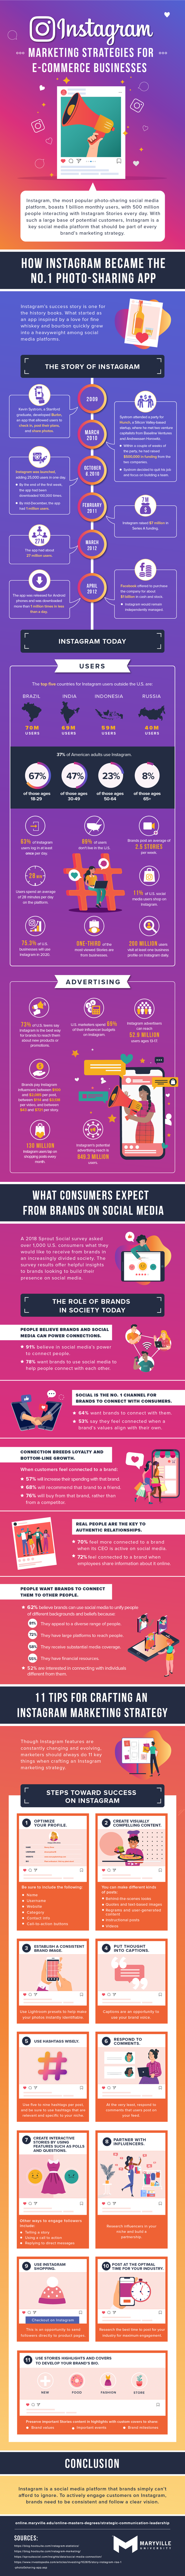 How marketers can optimize Instagram use go improve brand loyalty